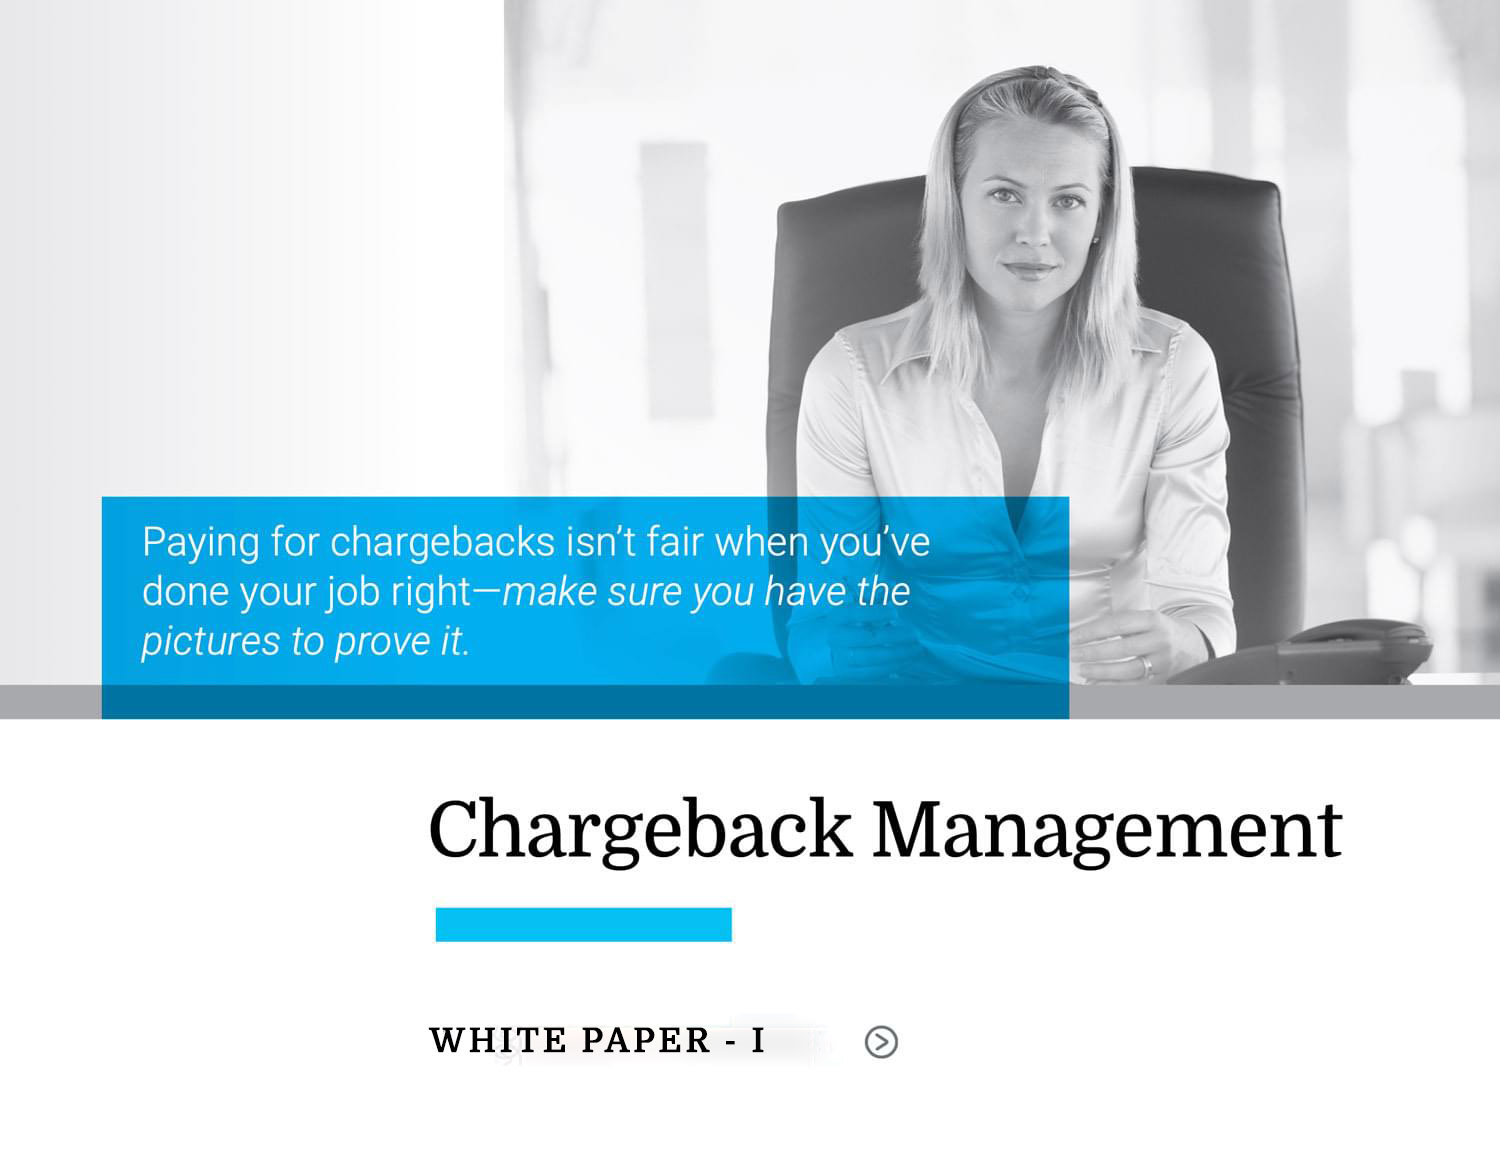 chargeback-management-white-paper-1